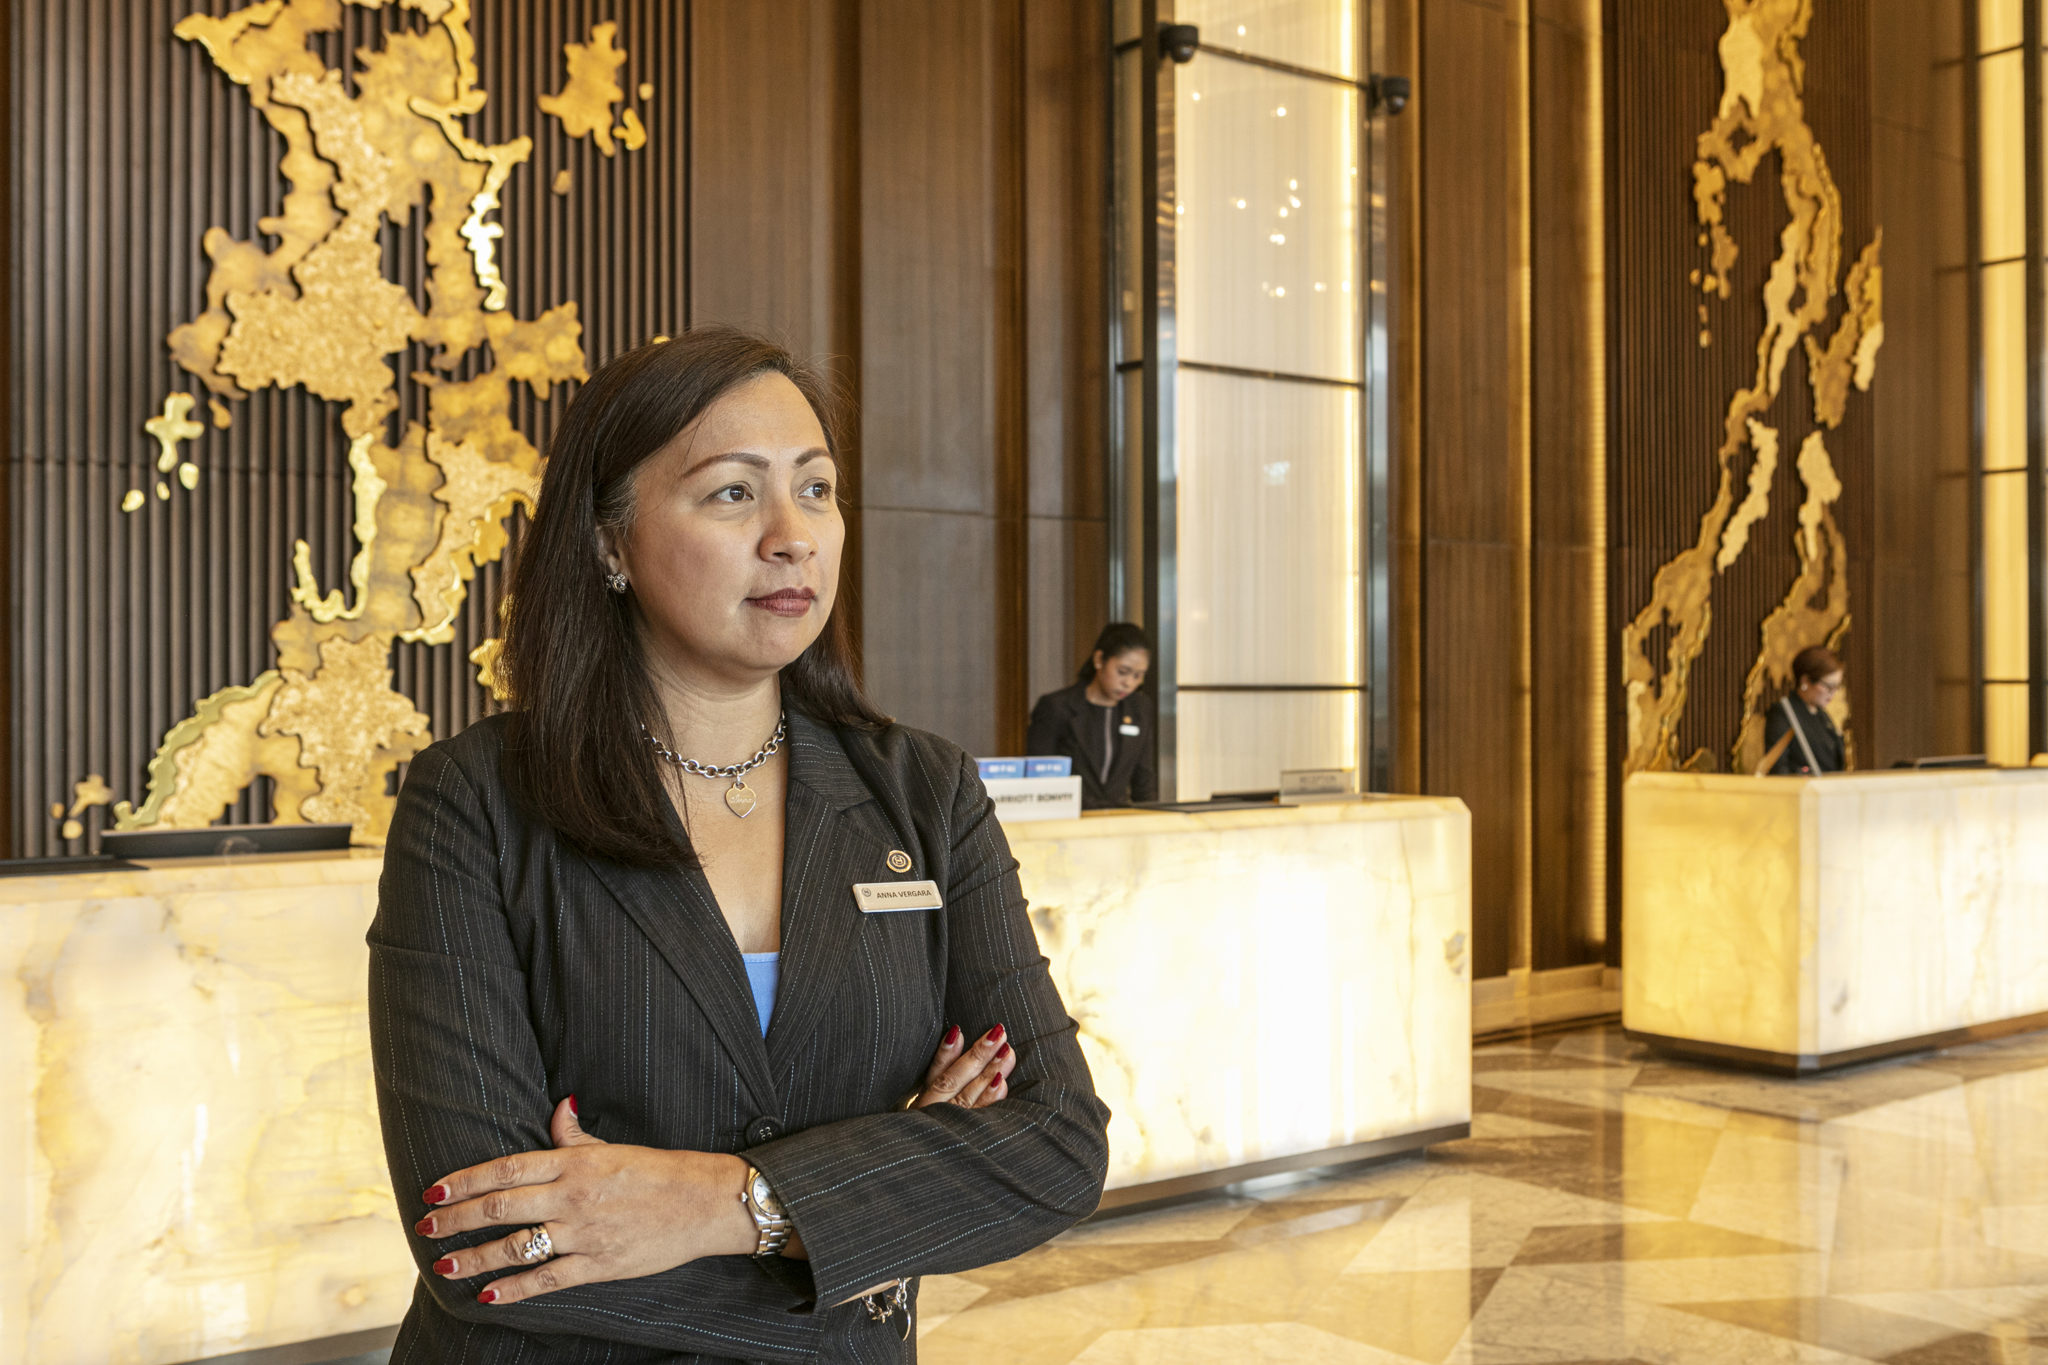 Anna Vergara is the first Filipino general manager of an international branded hotel